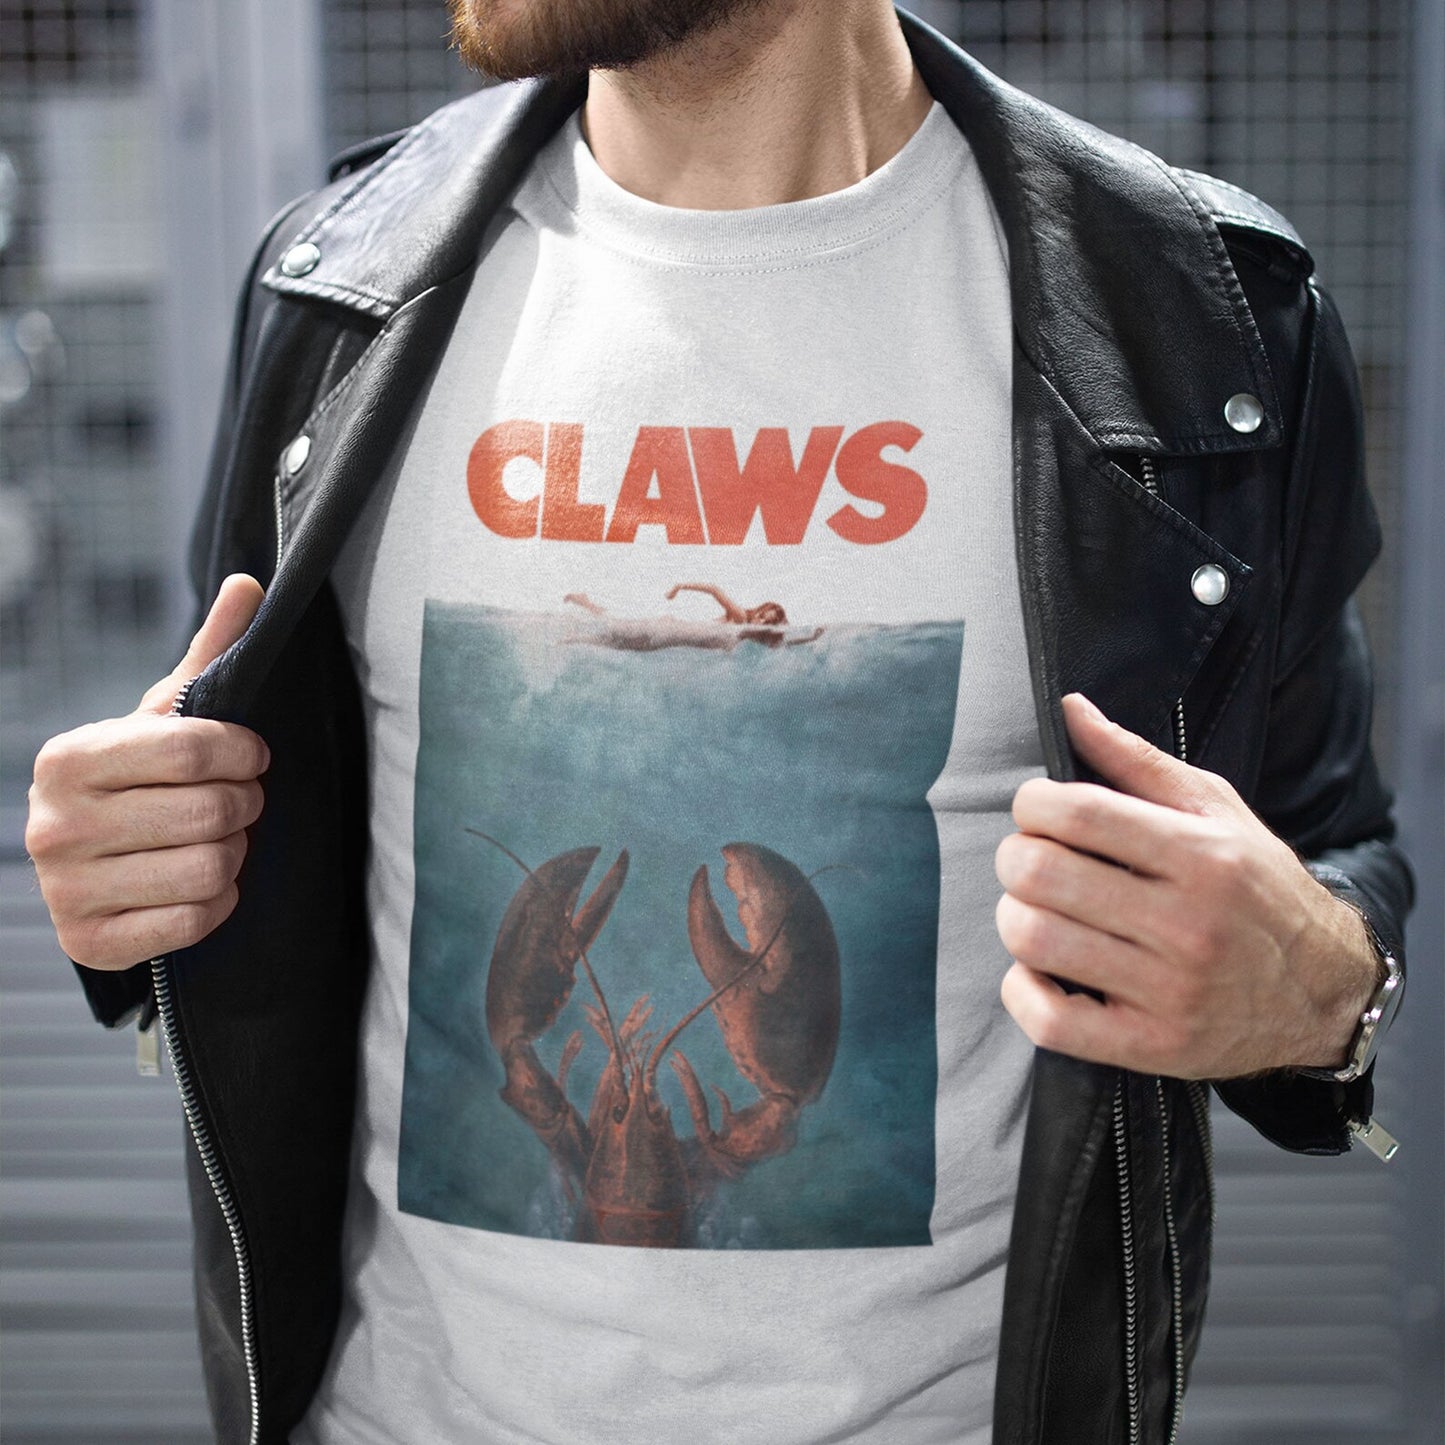 Claws Eco-Tee - Organic and Recycled T-shirt